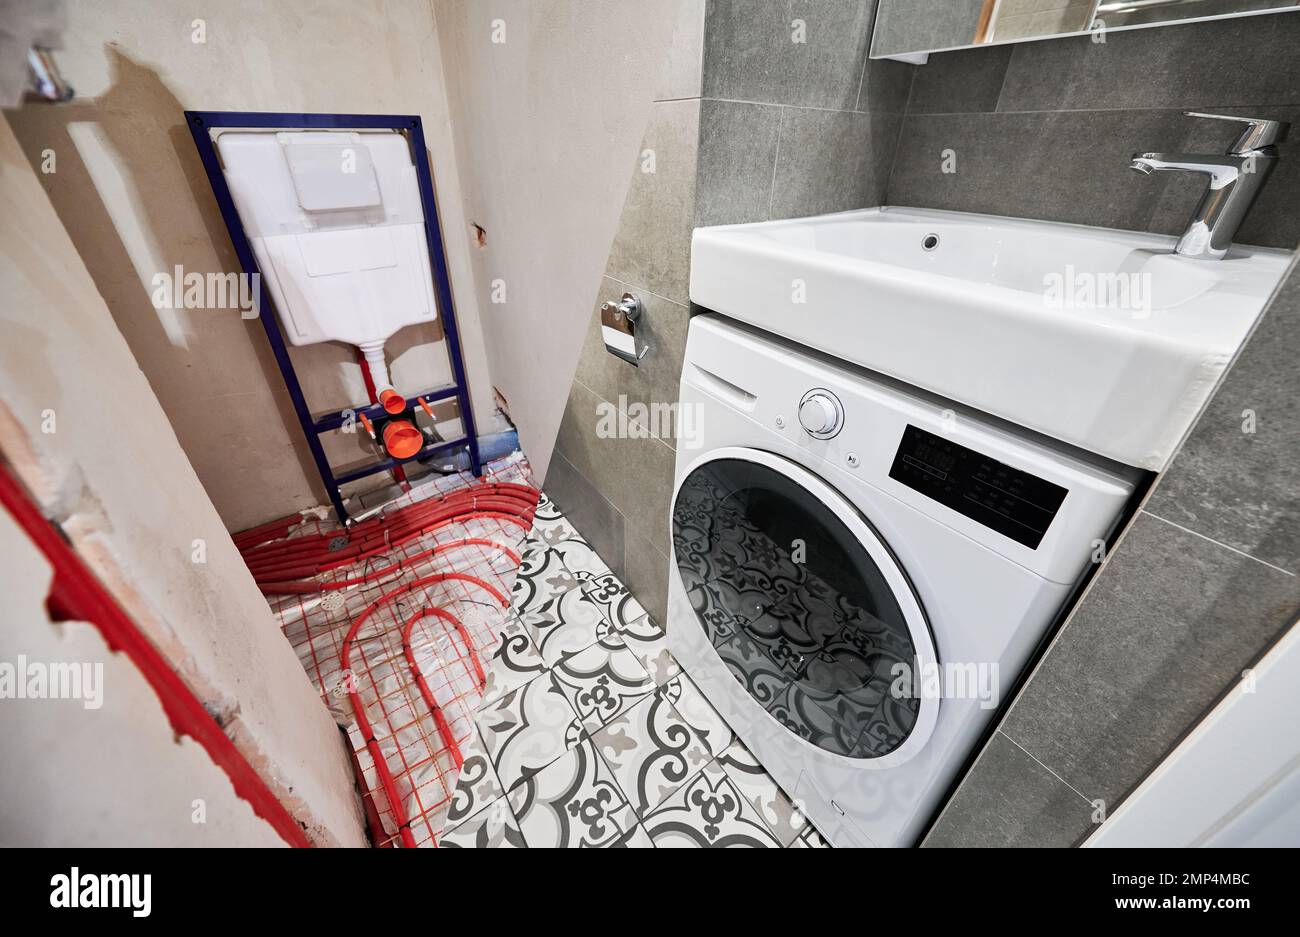 Comparison of washroom lavatory before and after renovation. Old apartment restroom with underfloor heating pipes and new renovated toilet room with washing machine and washbasin. Stock Photo